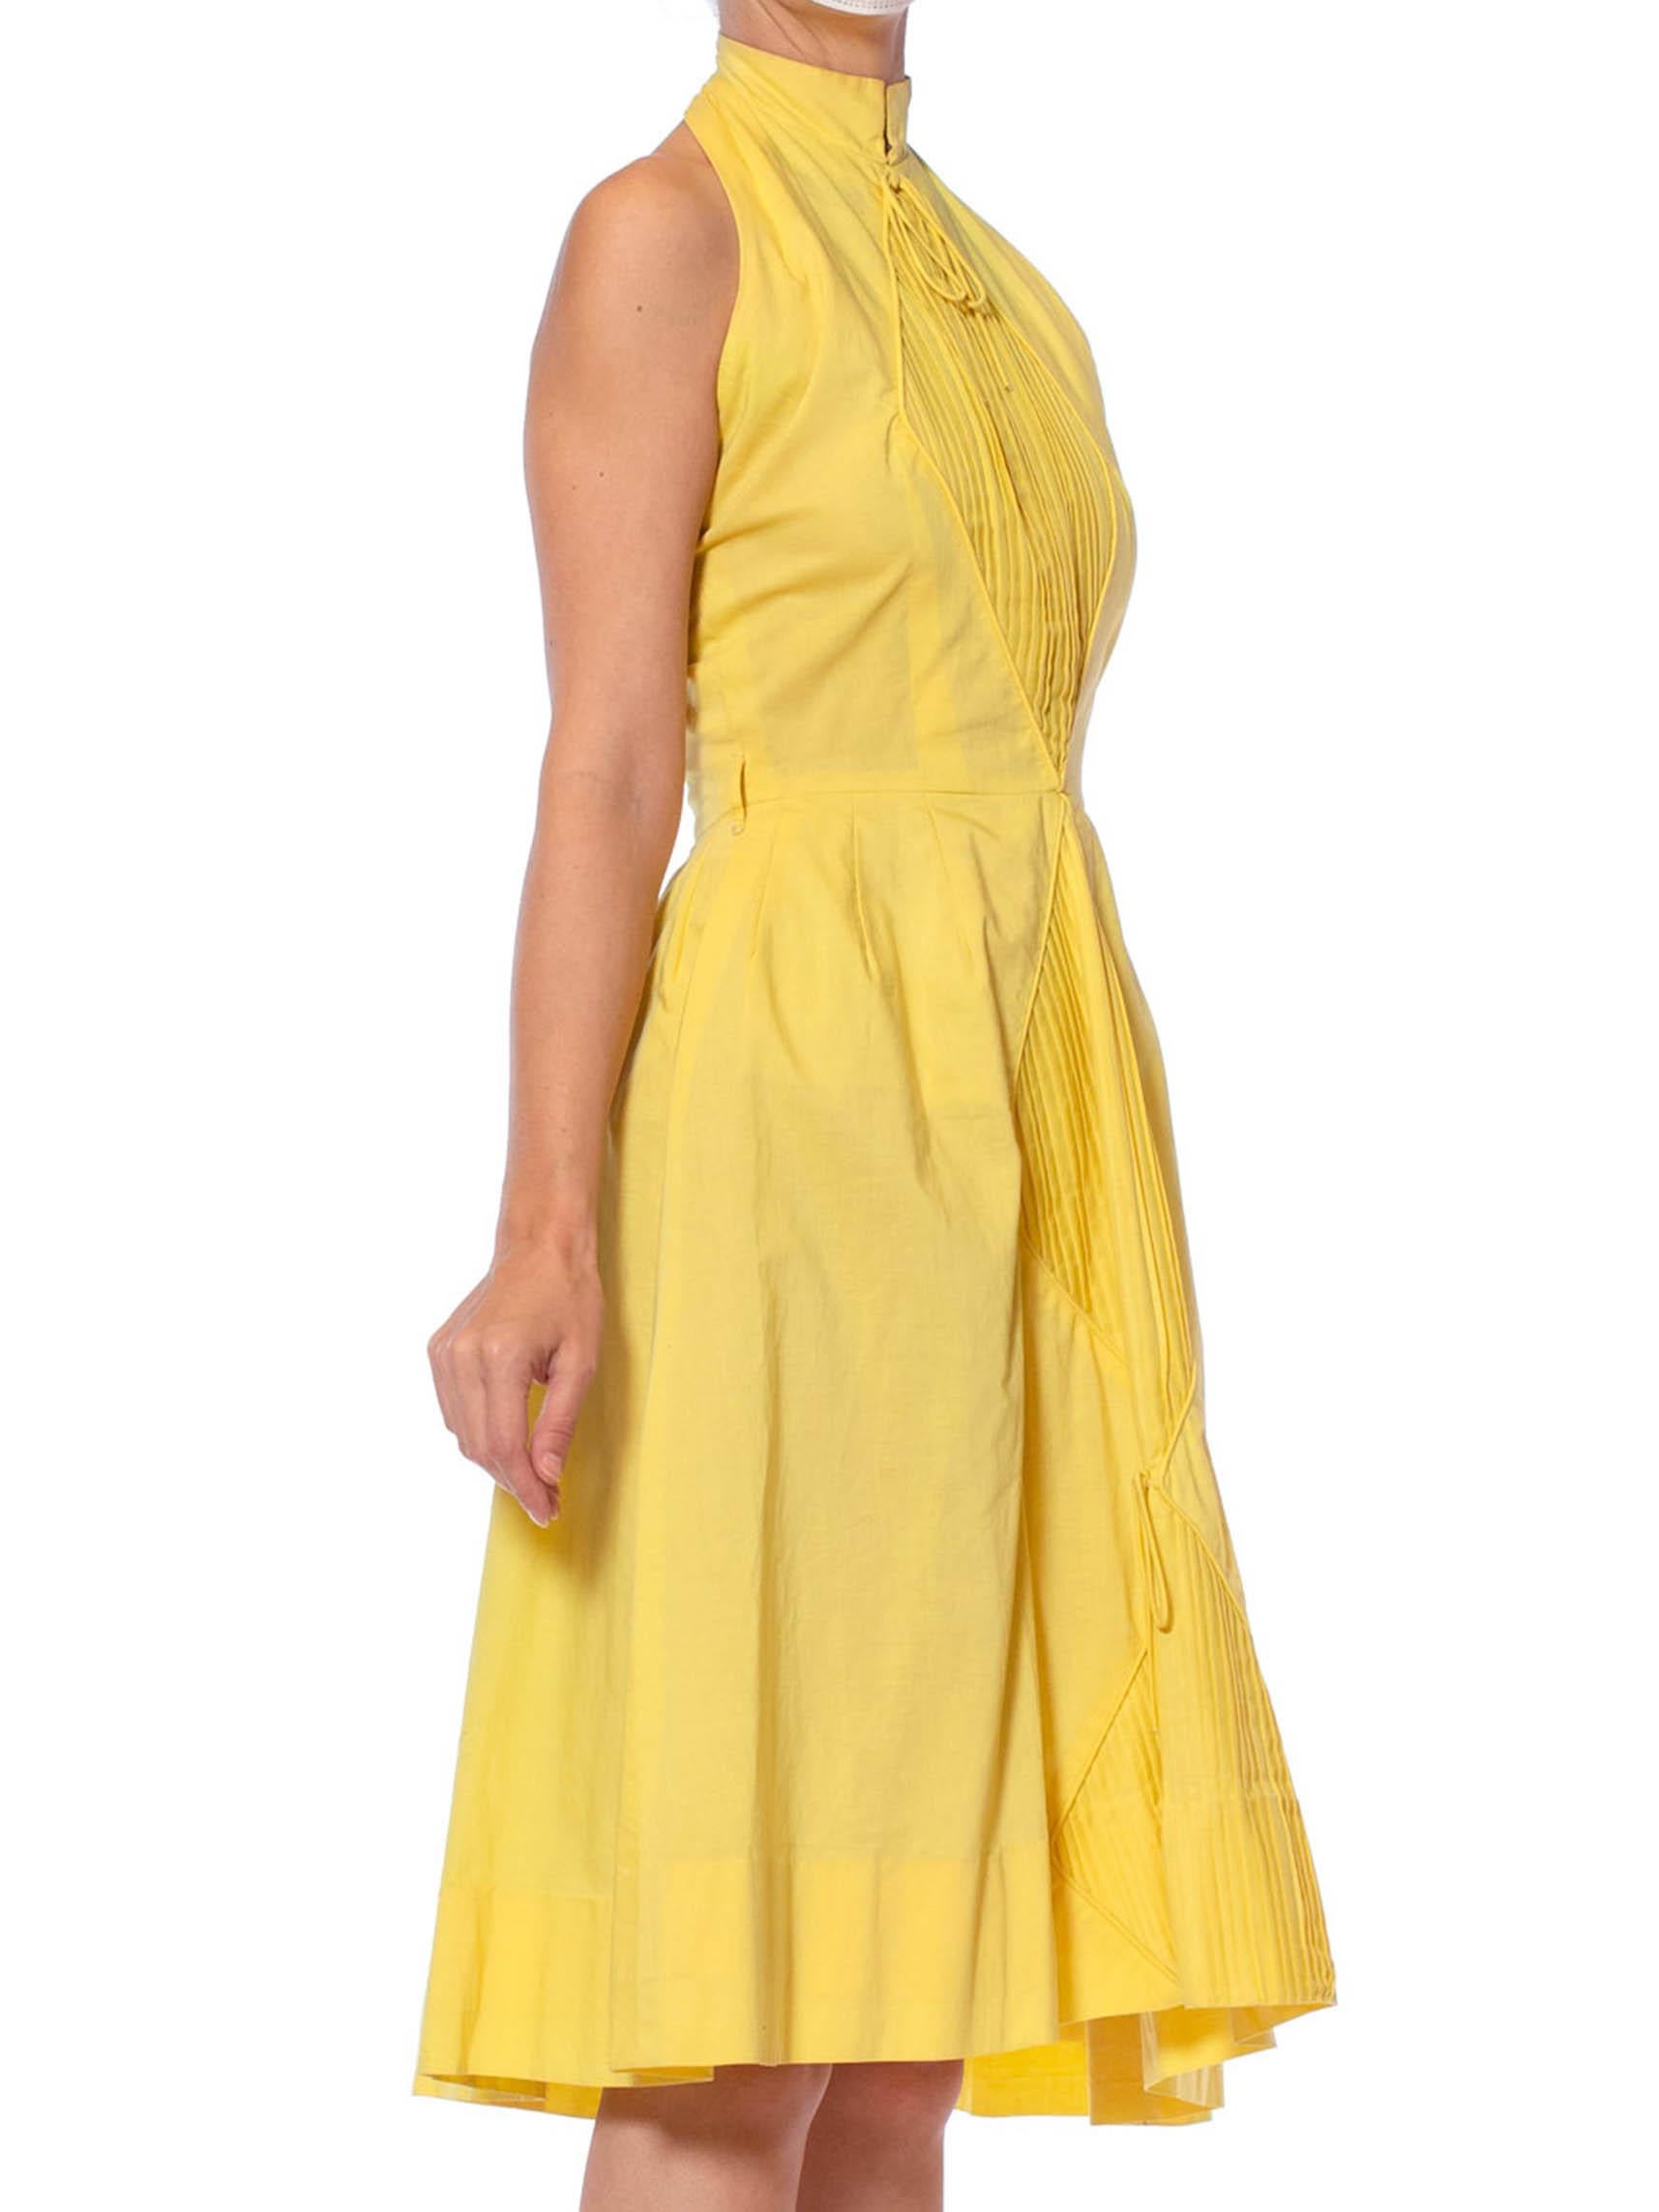 1950S SUZY PERETTE Yellow Cotton Halter A Line Dress With Pleated Diamond Insets 1